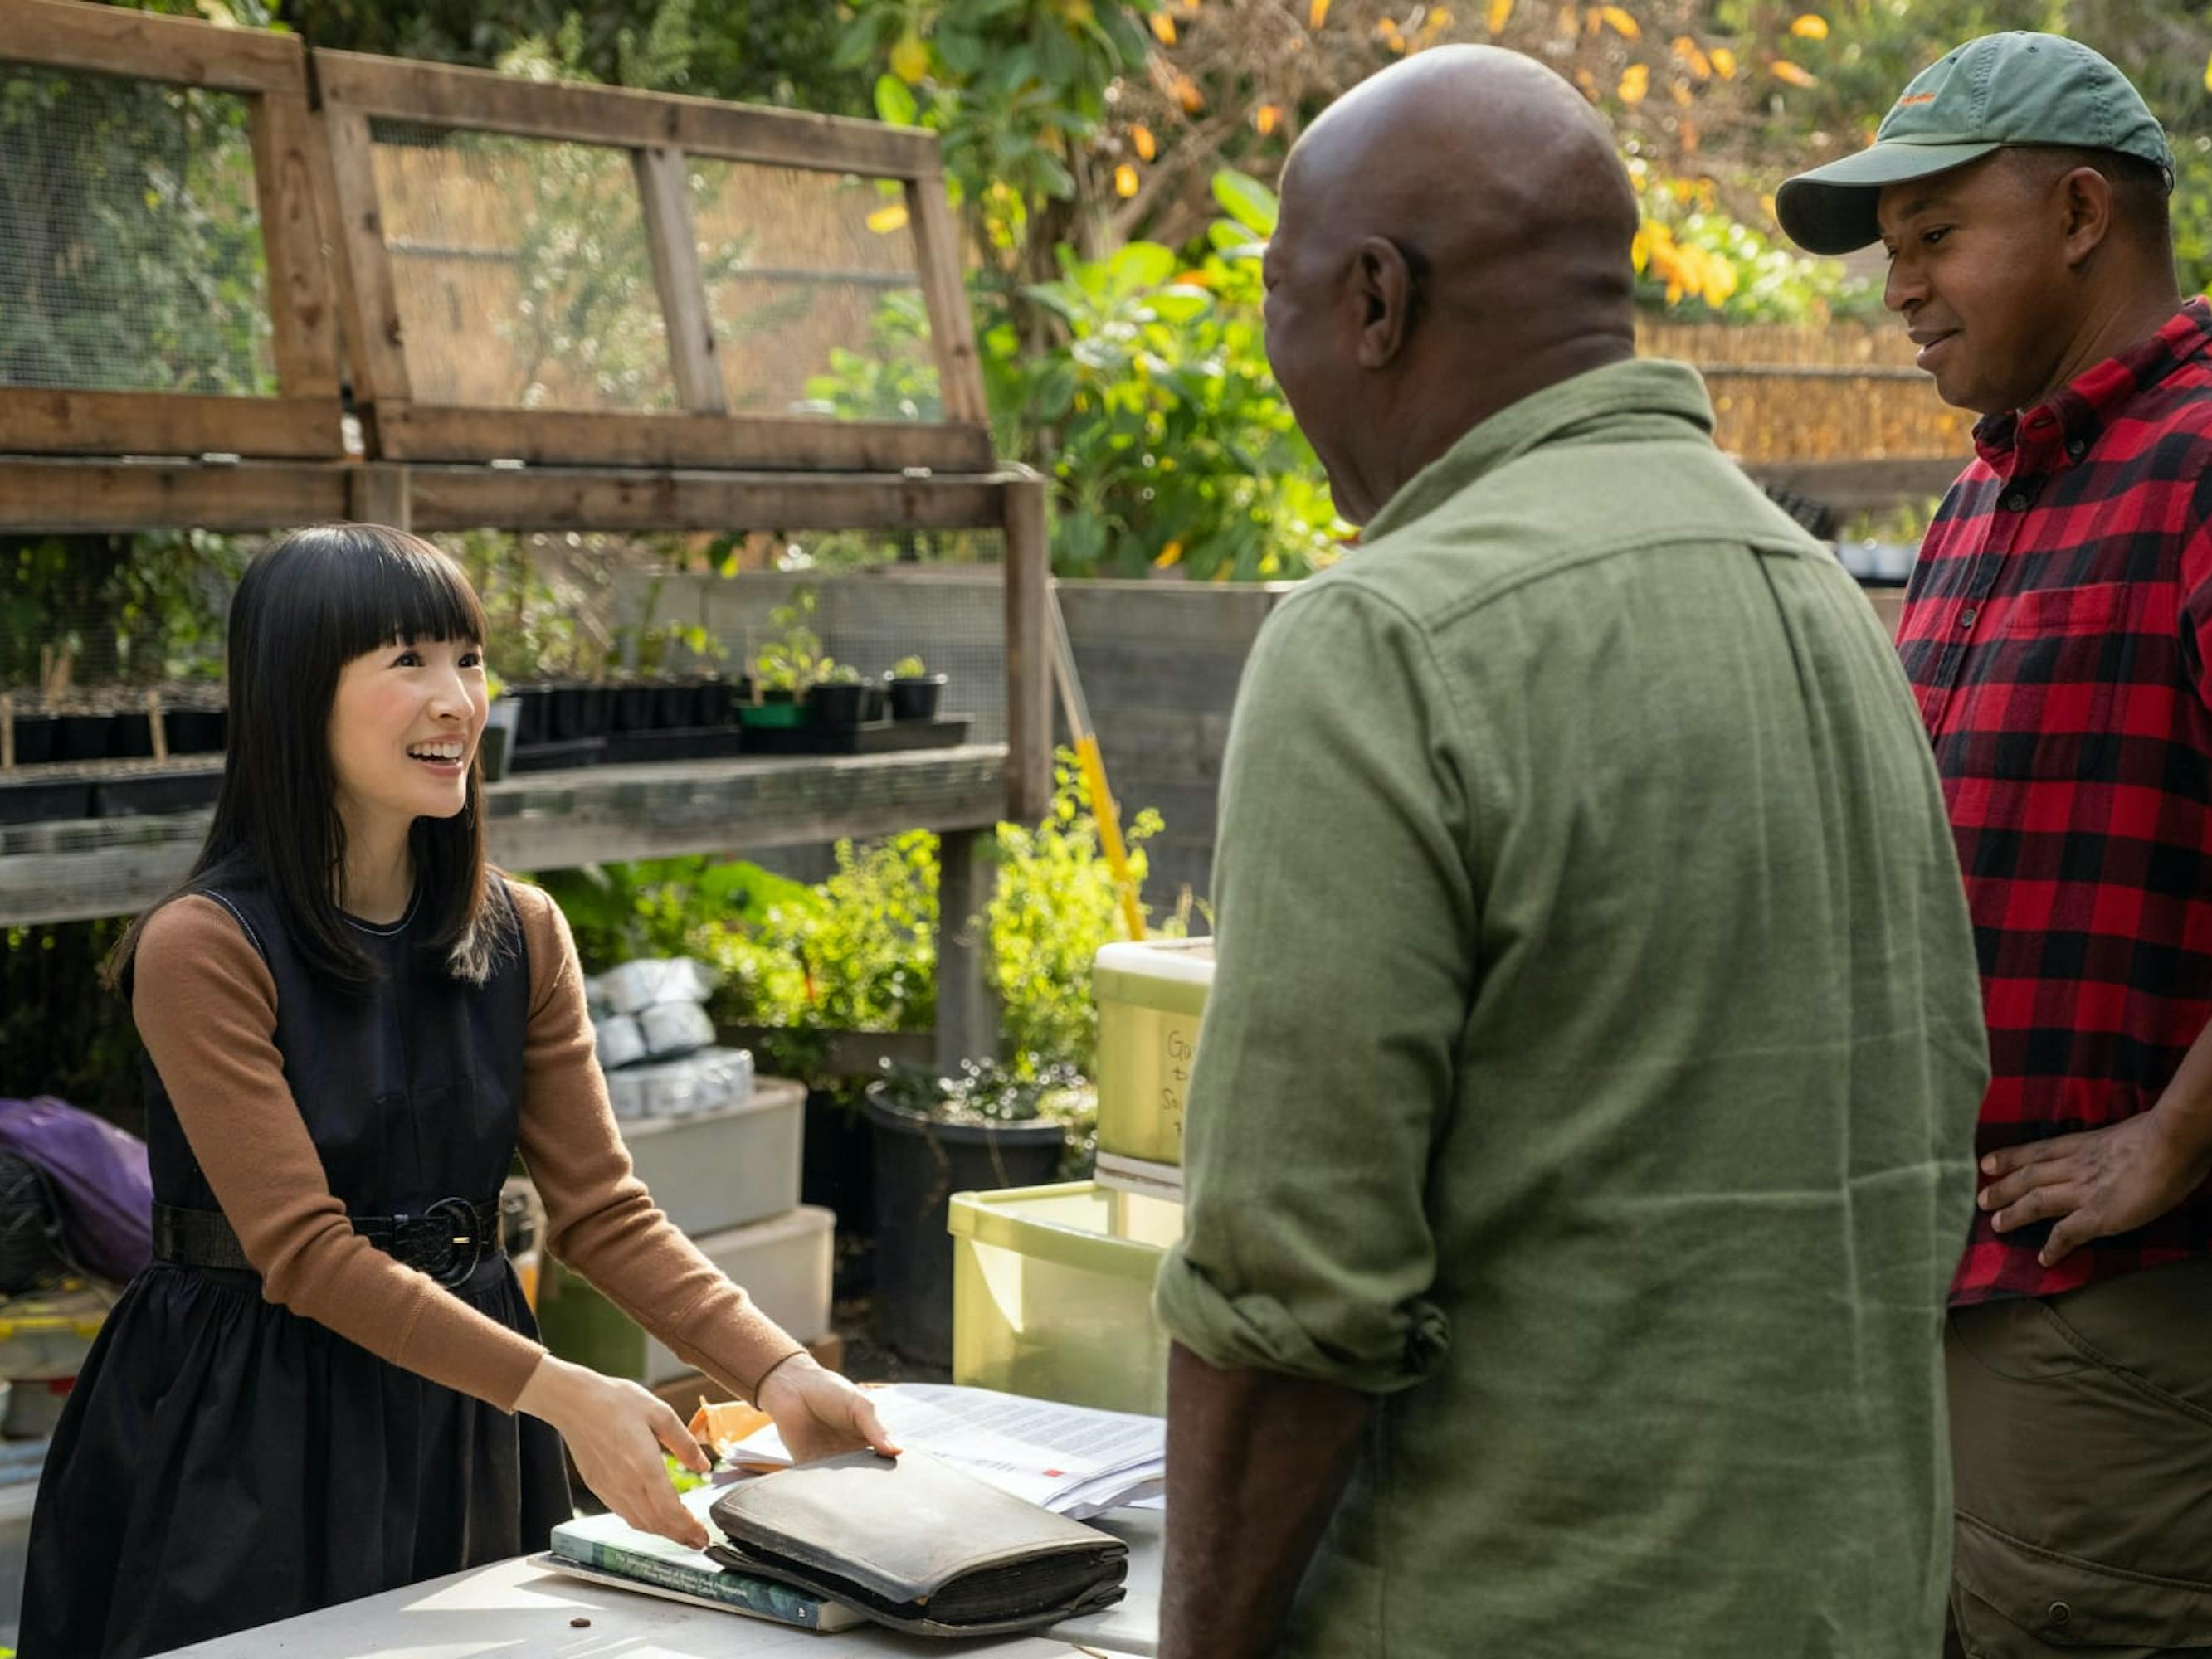 Marie Kondo wears a belted dress and long sleeve shirt and stands opposite clients Logan and Jim, both wearing button-downs, outdoors at their plant nursery.